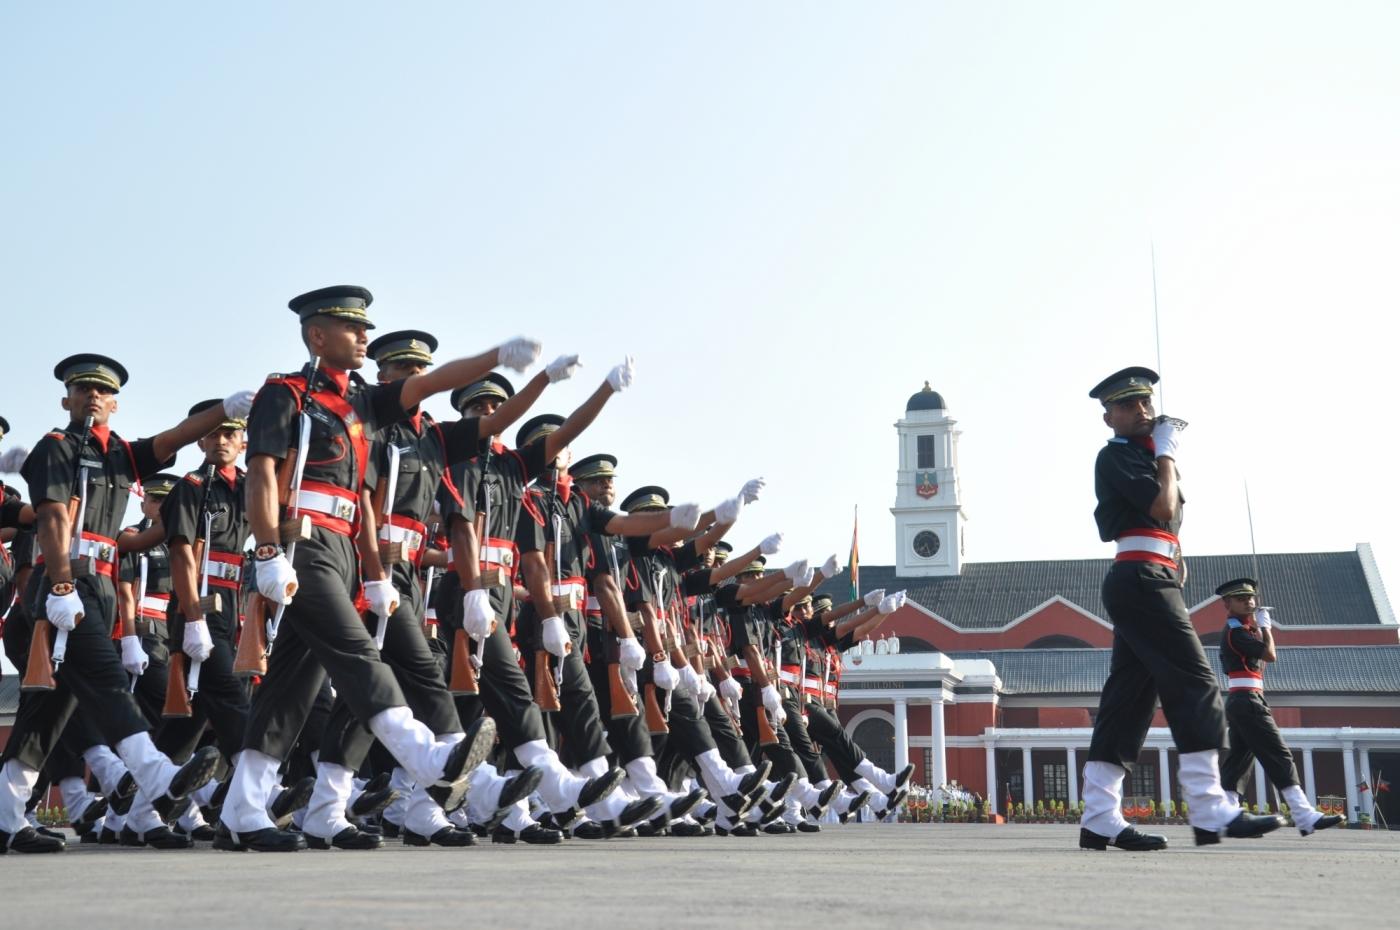 Dehradun: Cadets march during their Passing out Parade at the Indian Military Academy (IMA) in Dehradun, on June 8, 2019. A total of 382 cadets were commissioned into the Army after the Passing out Parade. (Photo: IANS) by .